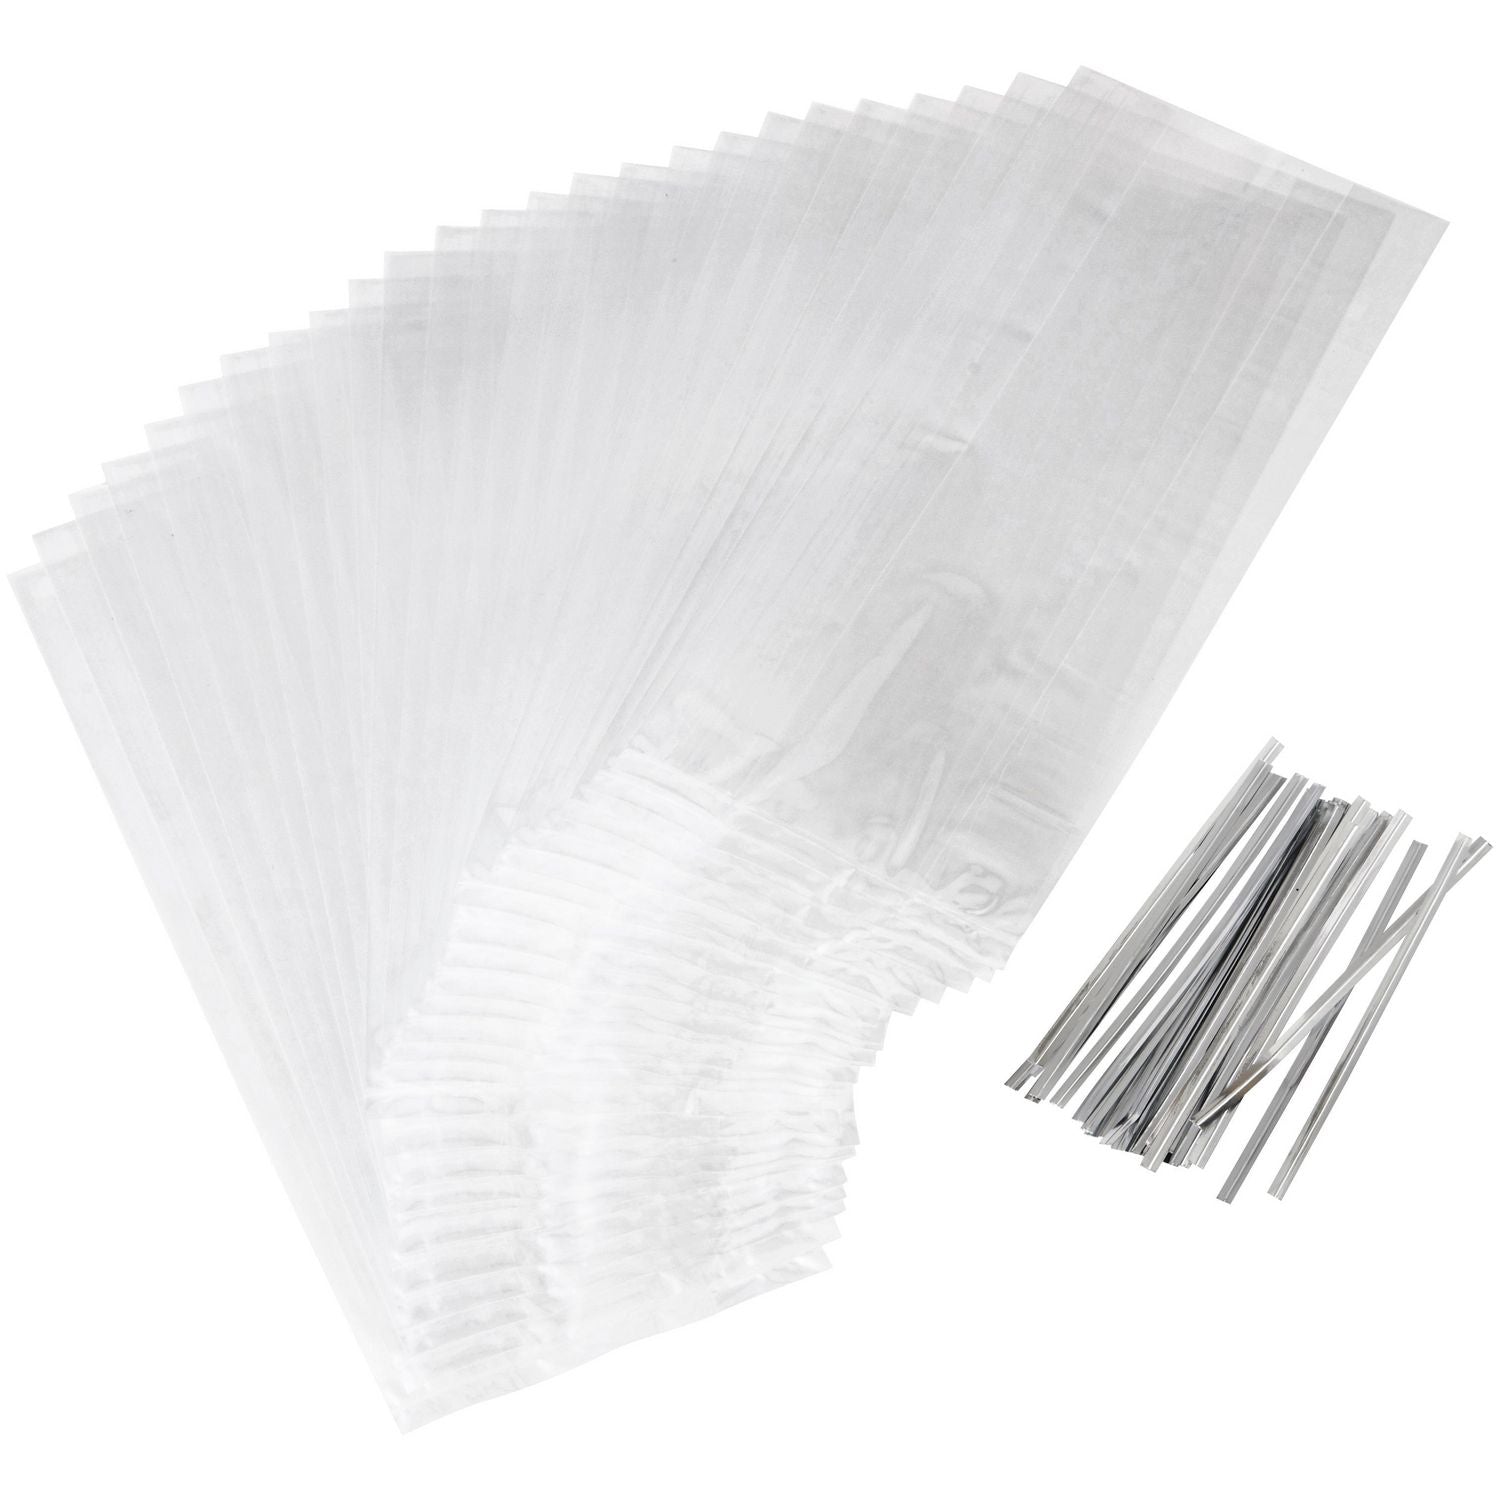 Wilton Clear Party Bags w Ties